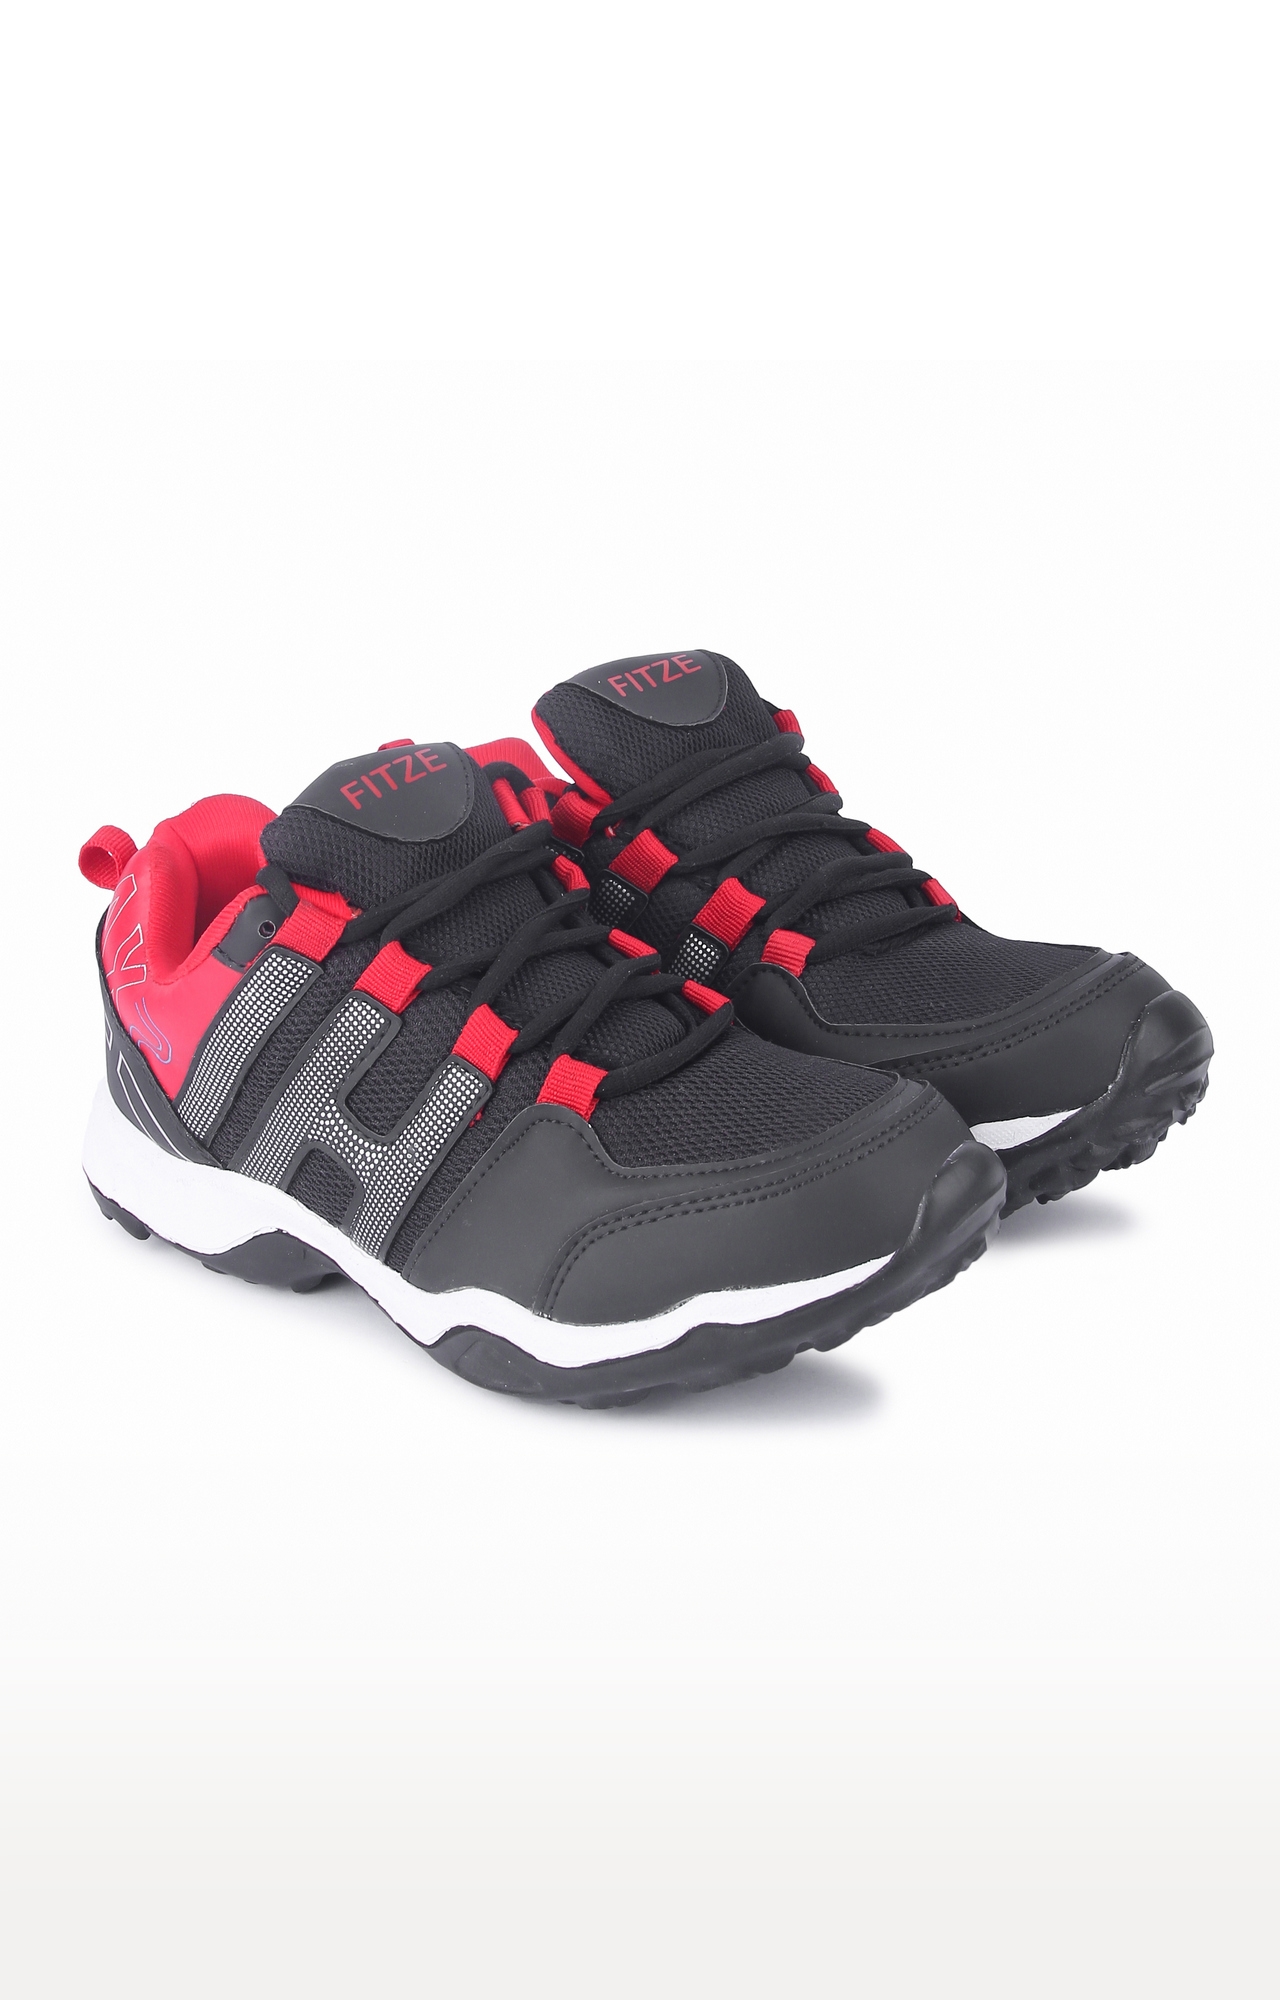 Black Red Outdoor Sports Shoes (HOX_534_BLK_RED)